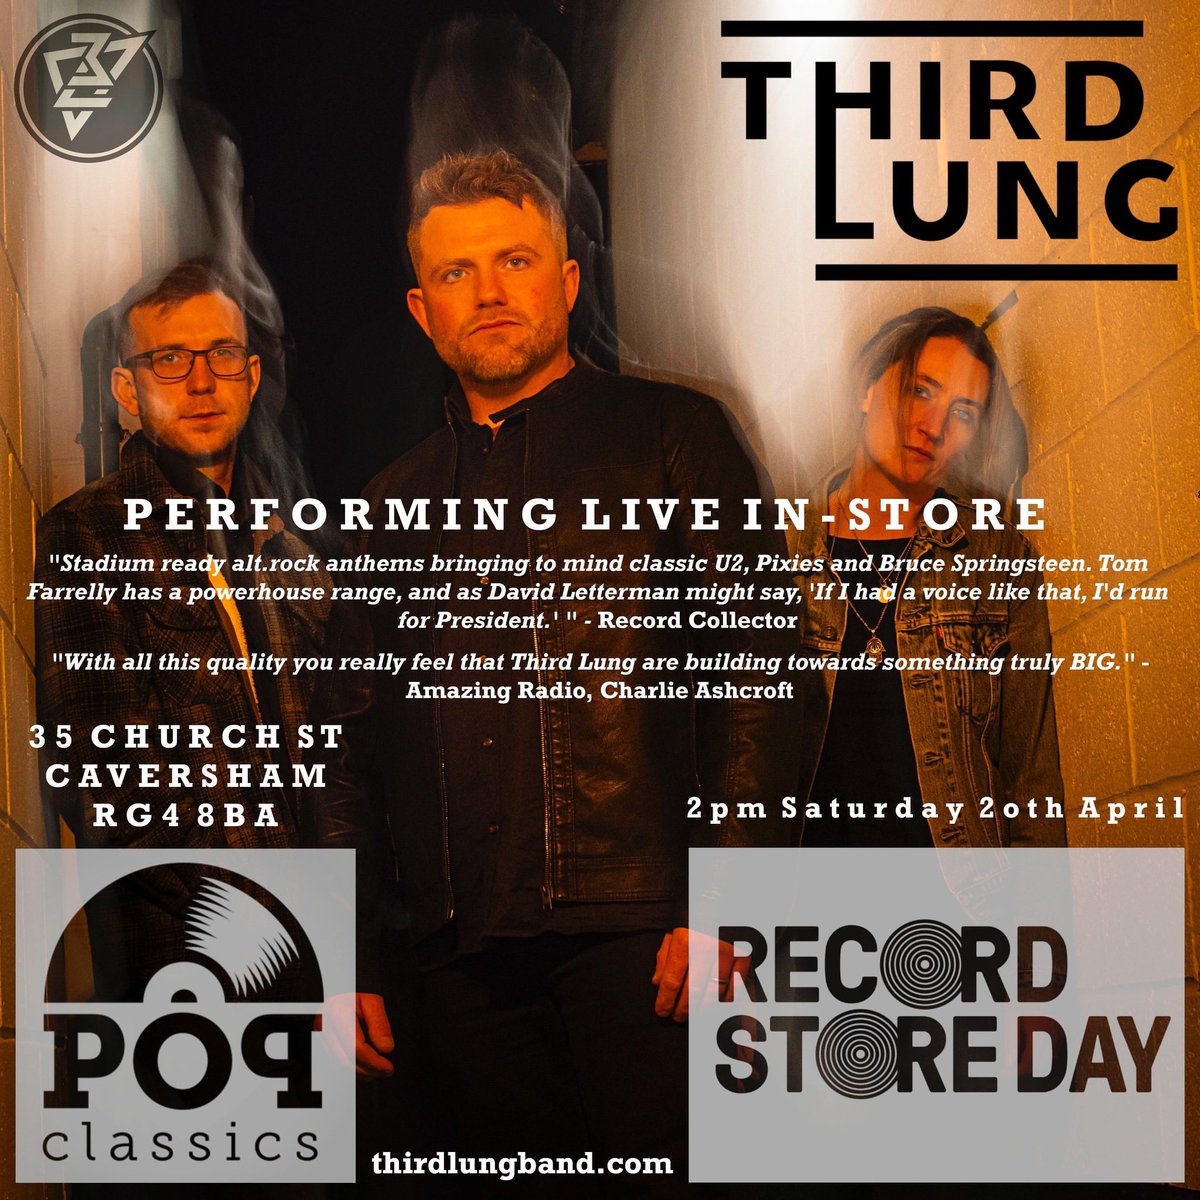 Tomorrow! 👀 Catch @ThirdLungUK as they play a special set for RECORD STORE DAY! 🎶💰 Head down to @popclassics1 in #caversham and celebrate this years @recordstoreday in style, as the band are set to perform a special stripped back set, live in-store at 2pm!